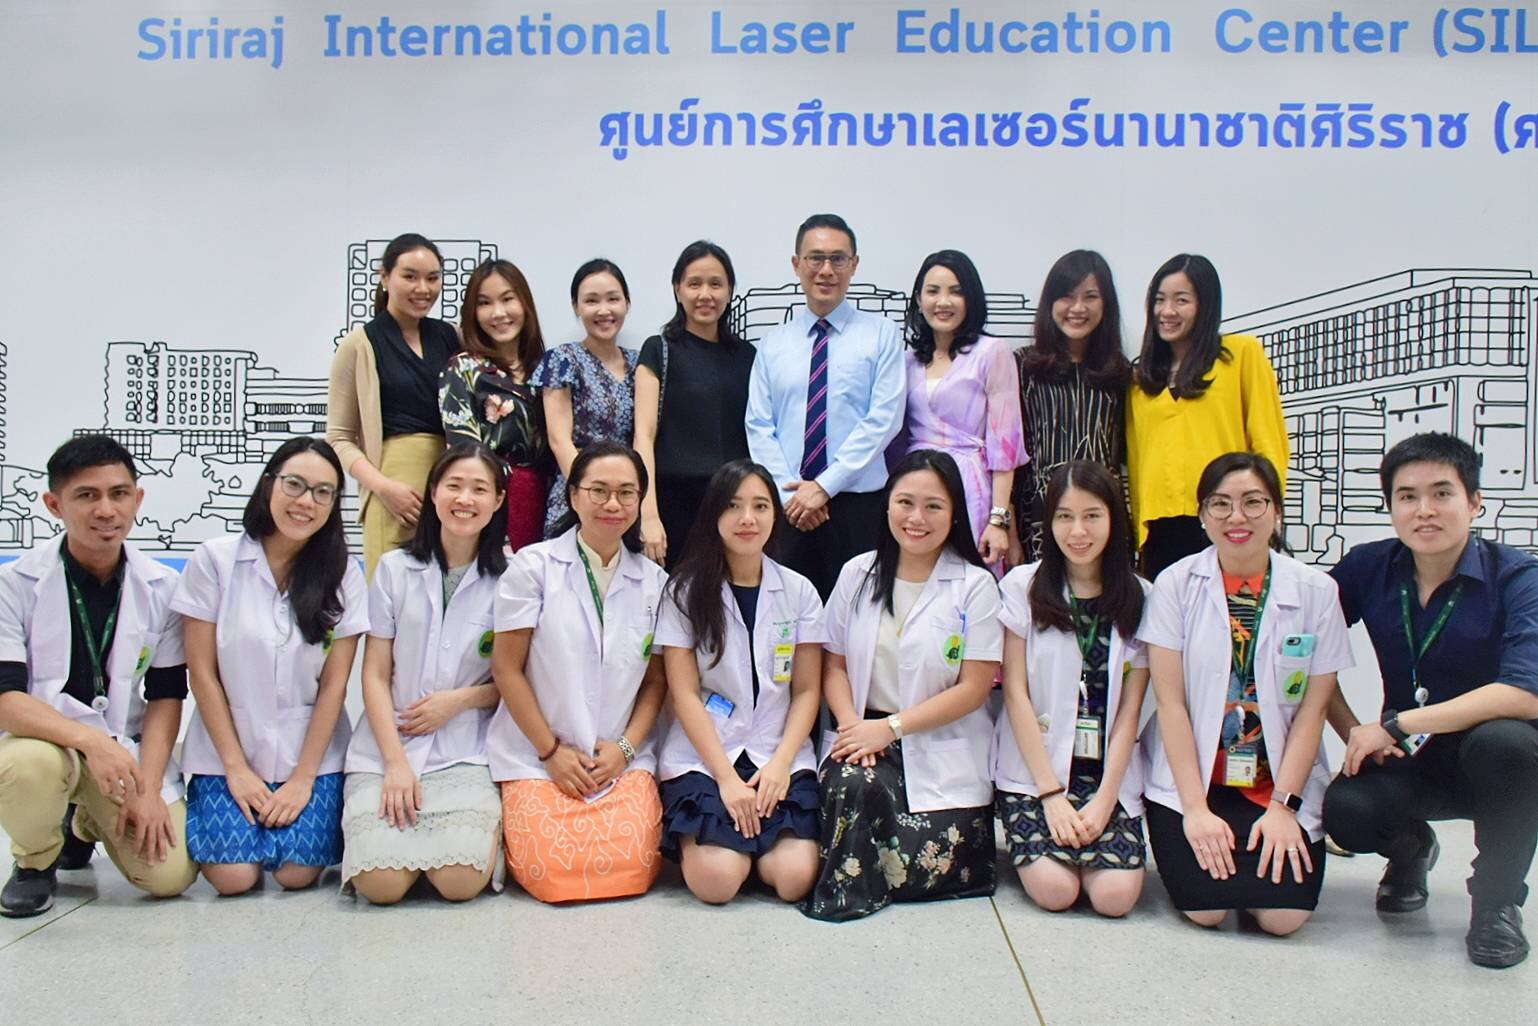 “The 4th Cadaver and Hands-on Workshop for Fillers Injection” at Siriraj